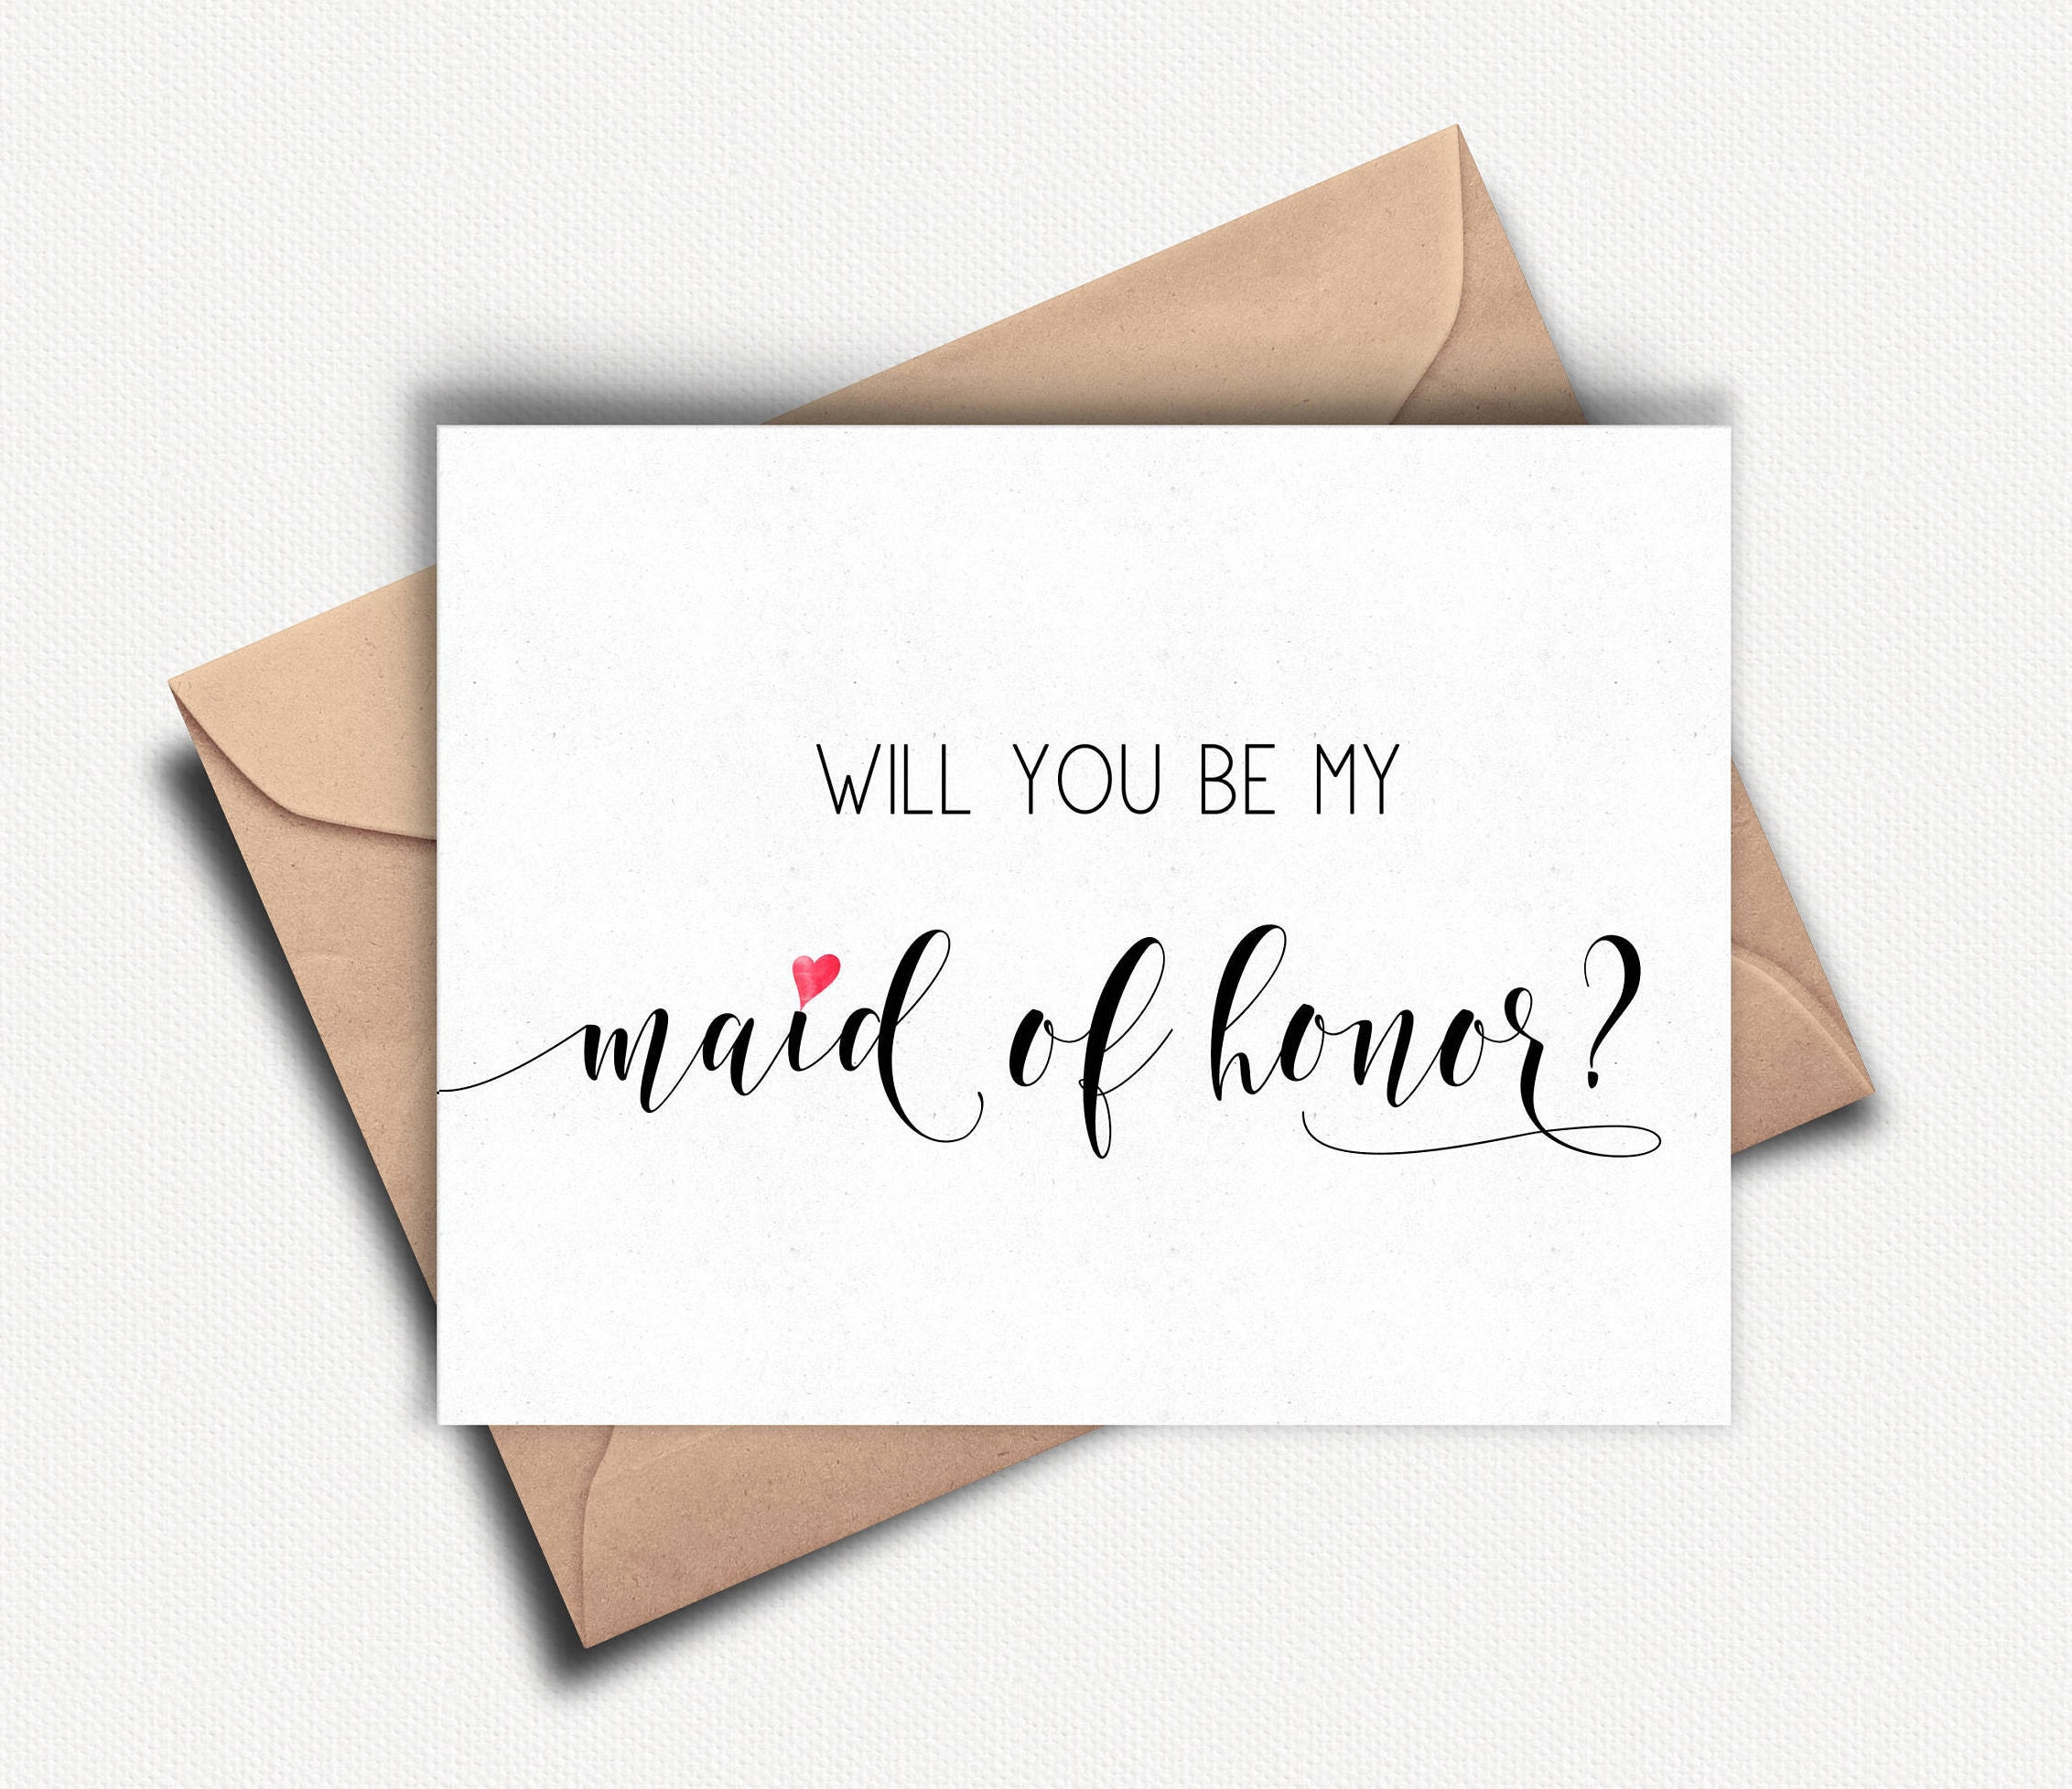 will-you-be-my-maid-of-honor-card-maid-of-honor-proposal